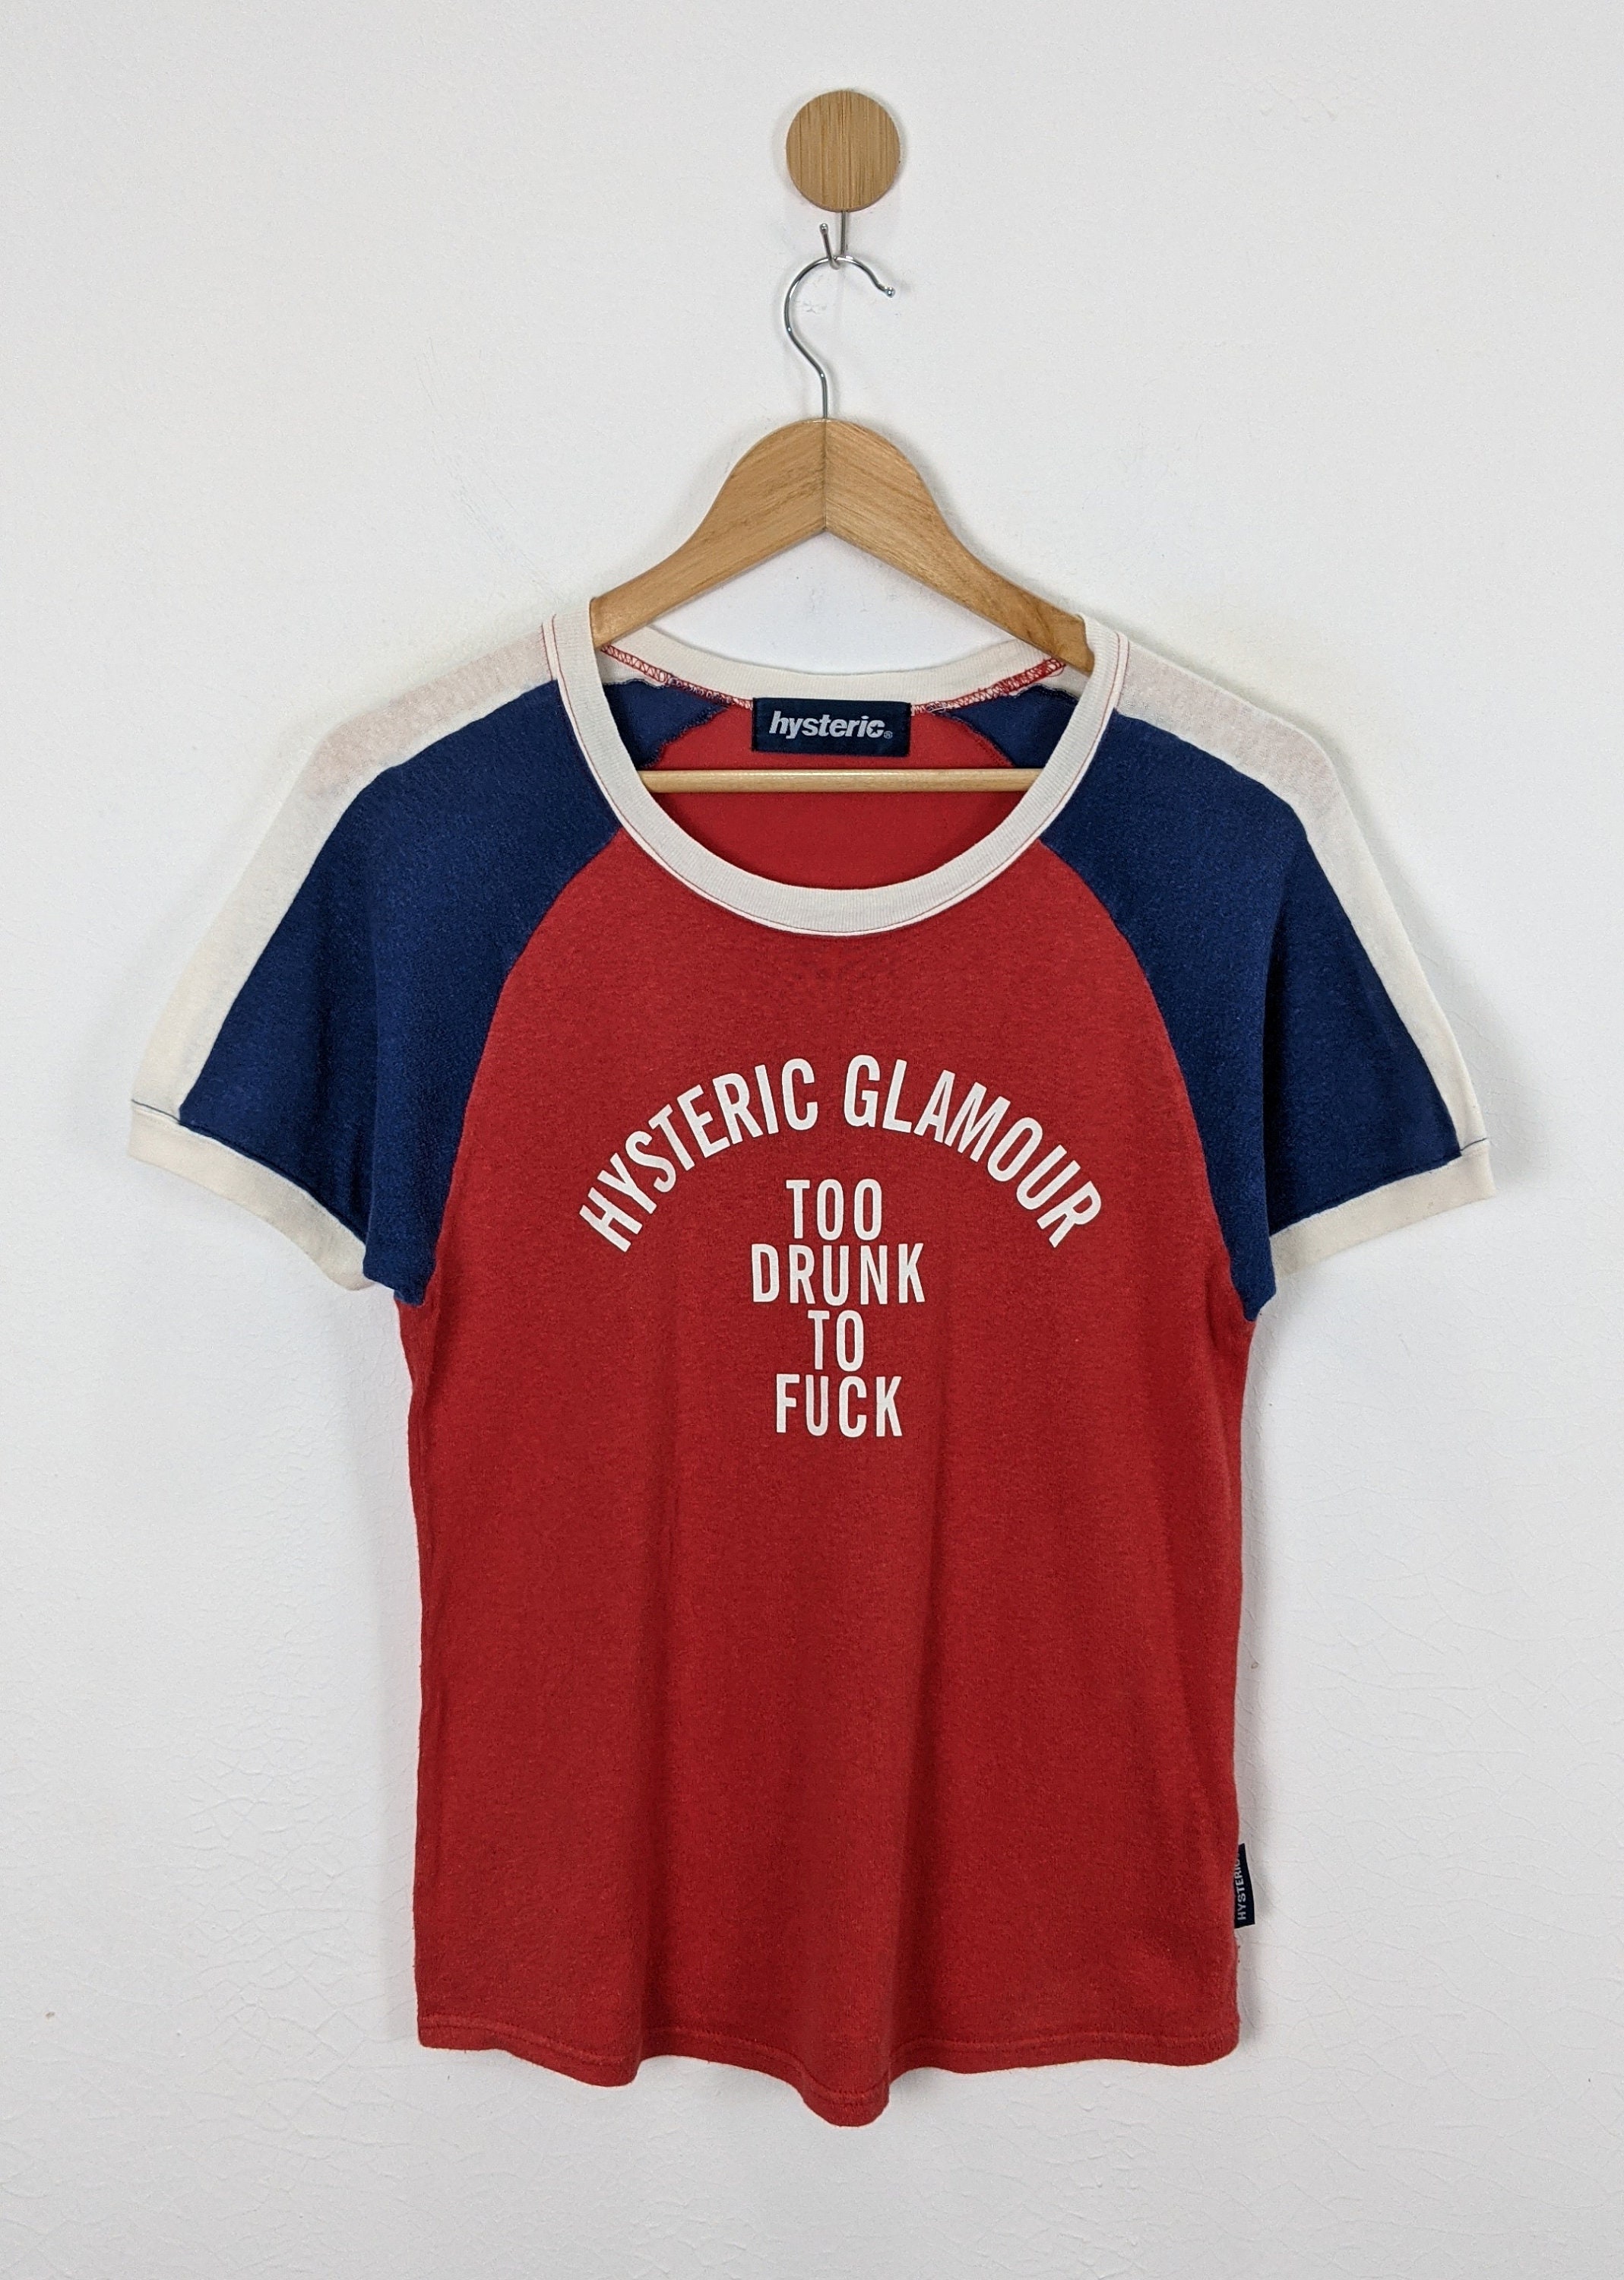 Hysteric Glamour Too Drunk Too Fuck Shirt Size S - Etsy